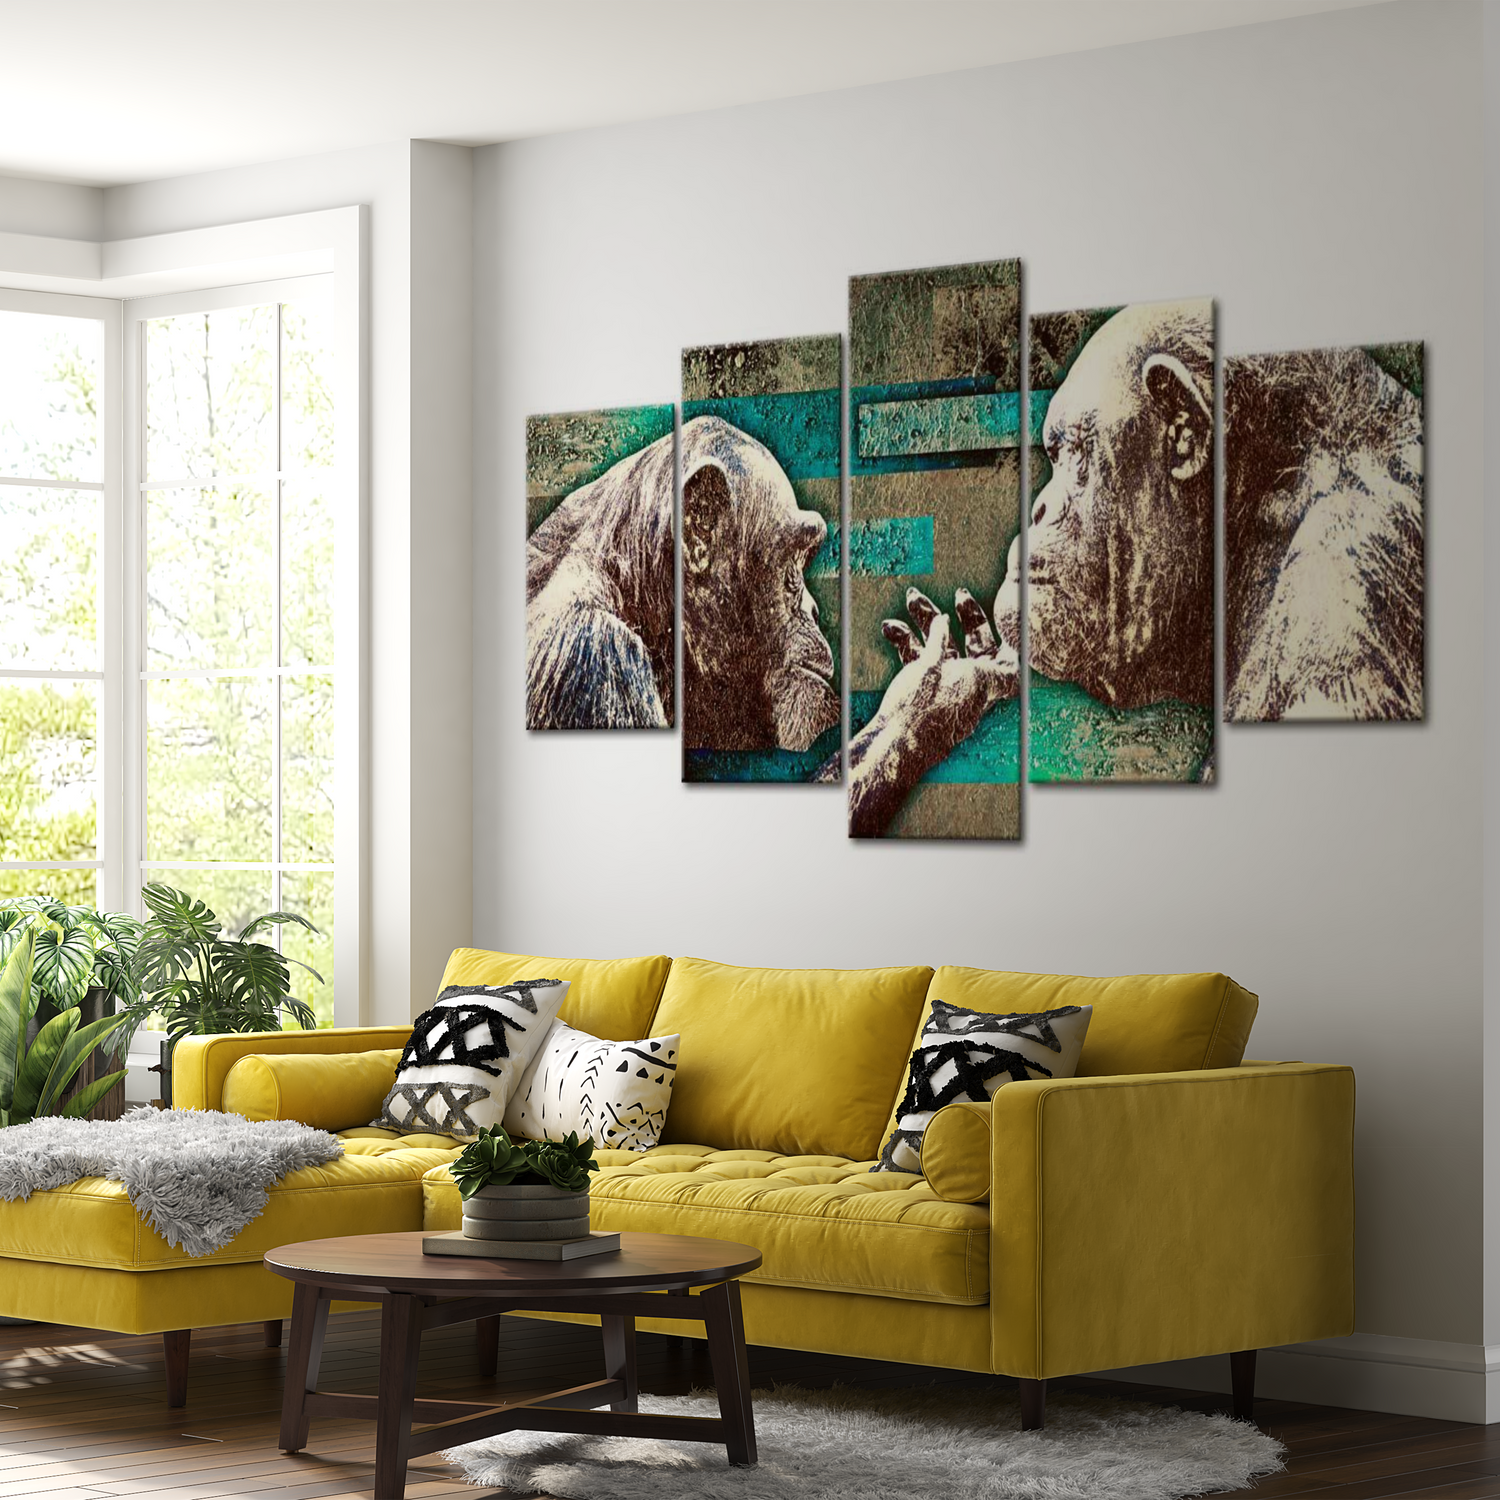 Stretched Canvas Animal Art - Learning Of Tenderness 40"Wx20"H